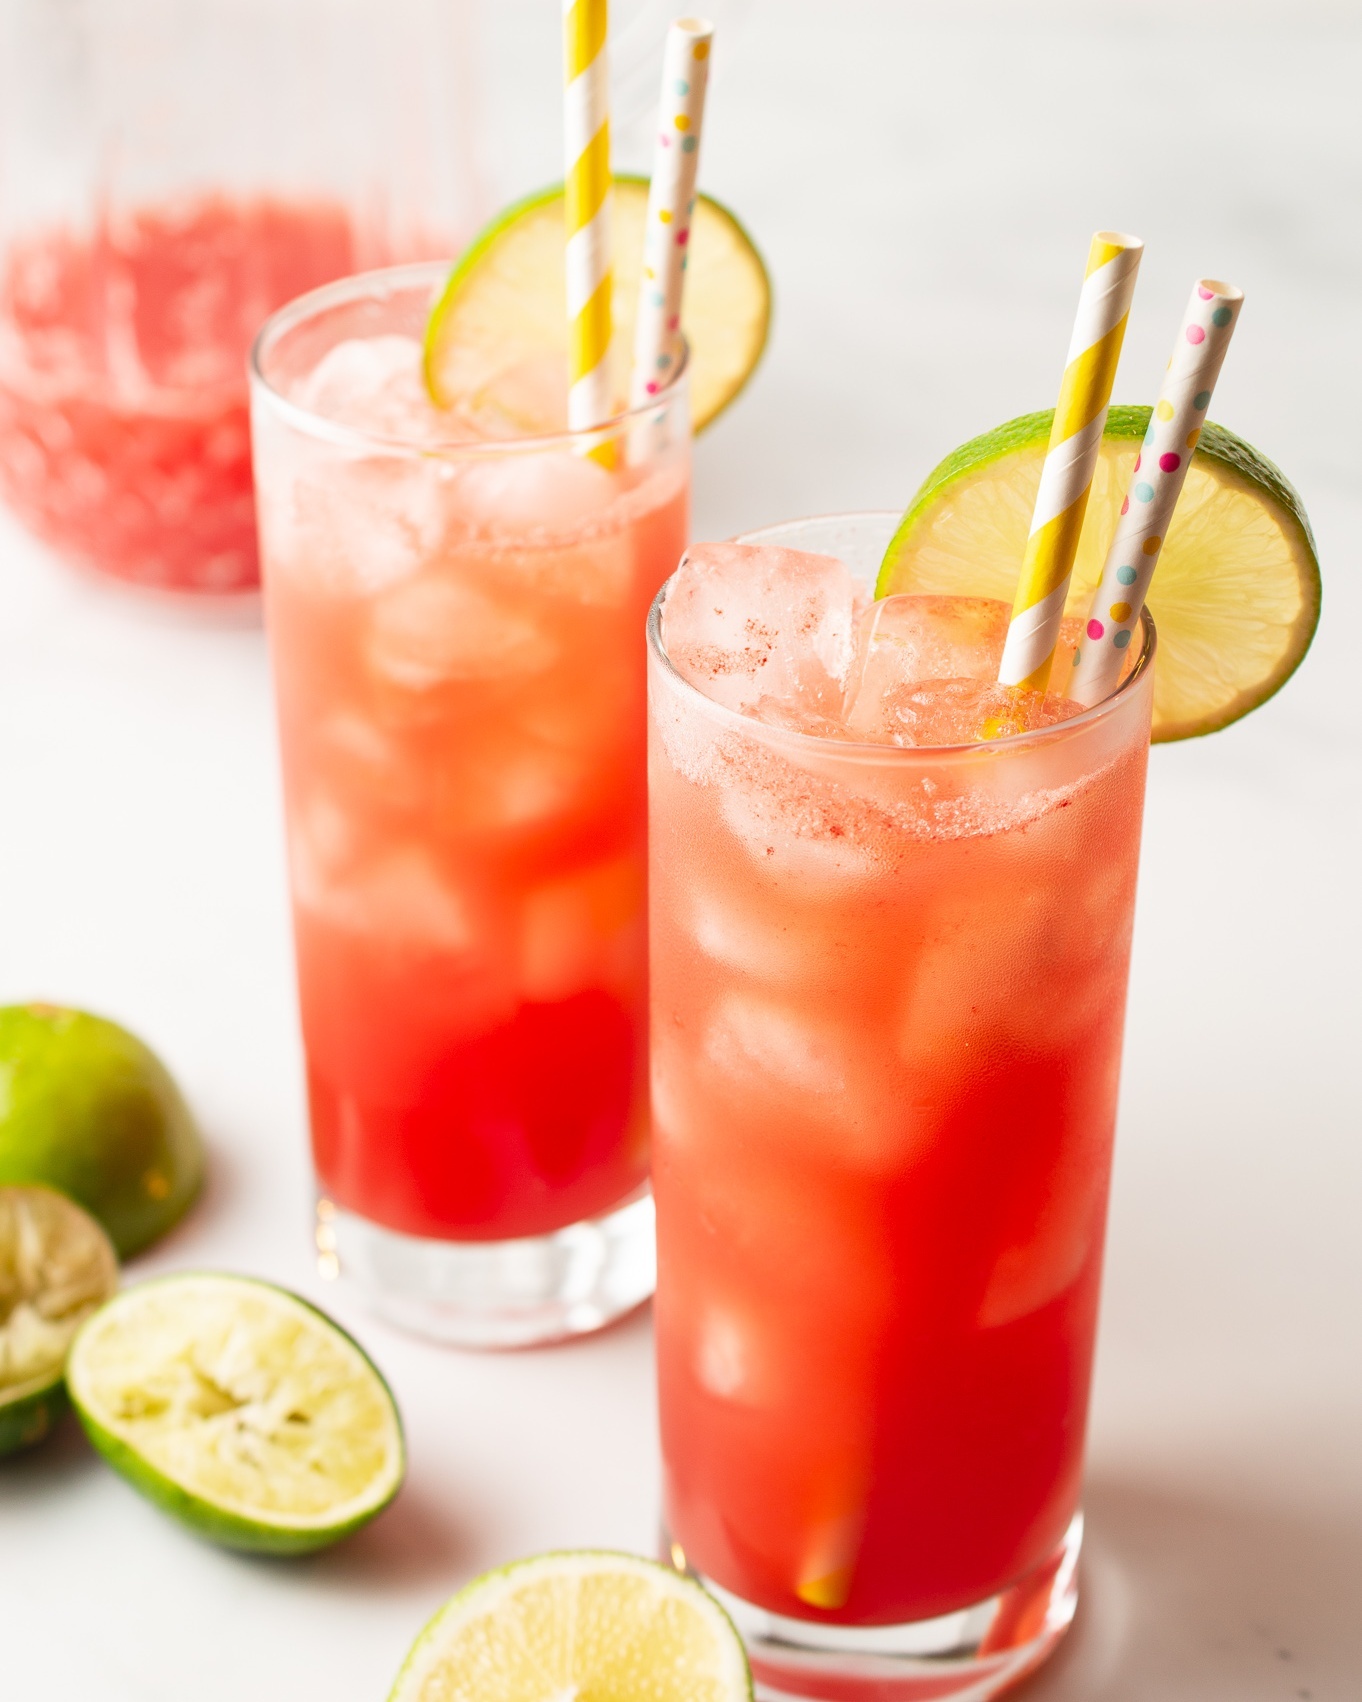 🍉You need this Watermelon Limeade! 🍉 OK, I do.  Temps are at or near 100º with a big ol' layer of southern humidity on top!  Yeesh! 🥵⁣
⁣
🍉Lucky for us, watermelon is plentiful right now, so we can make a refreshing treat and stay hydrated at the same time.  And if you have a LOT of it, having a drink recipe in your back pocket is a very good thing.  All you need is a good blender. 🙂⁣
⁣
🍉Want the recipe?  Just click on the link in my bio, and look for this photo.  Voilà!⁣
⁣
Stay cool, my friends!